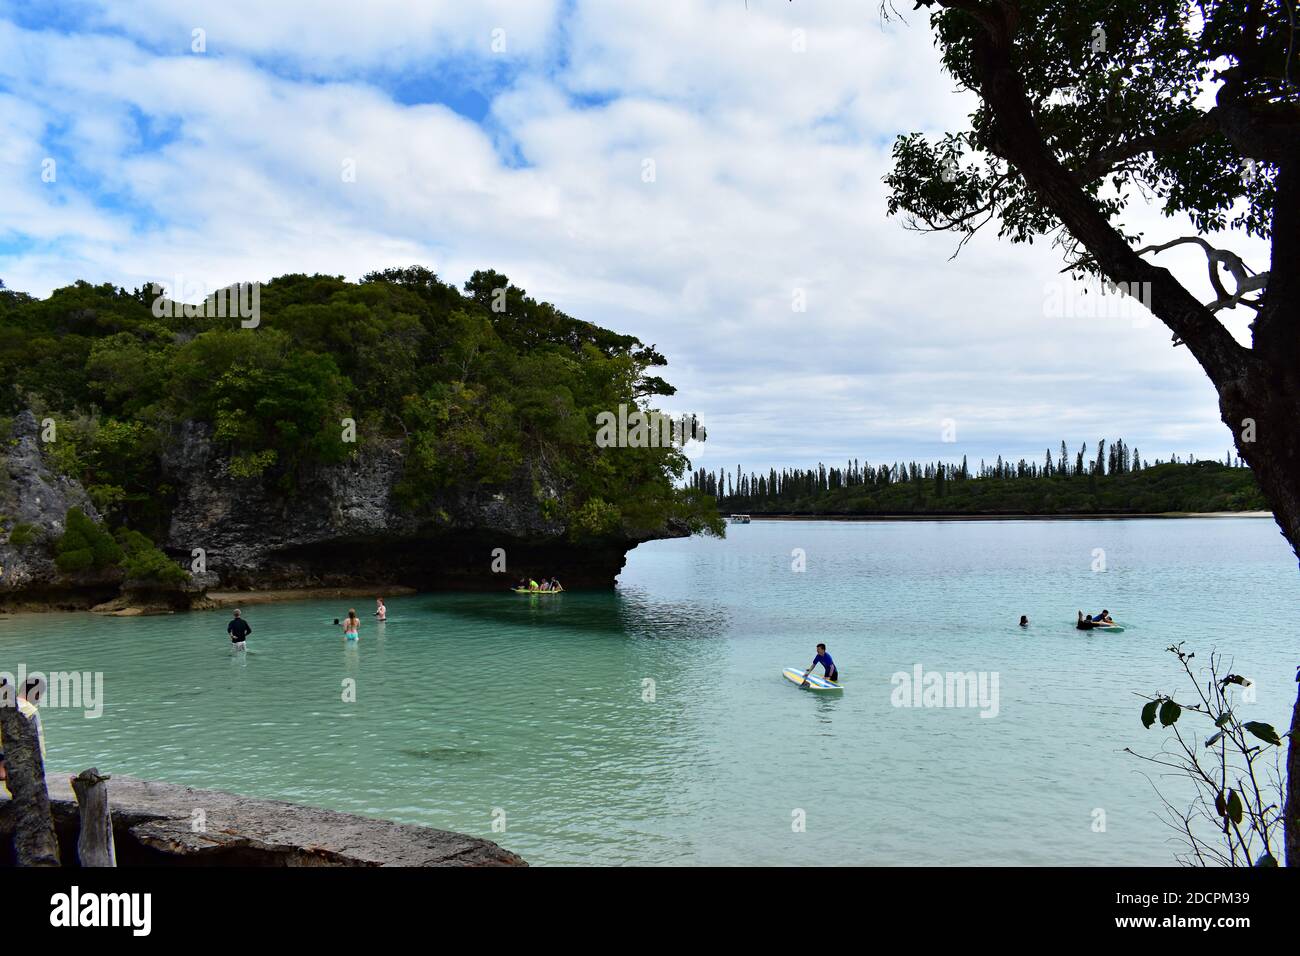 The sacred rock, Rocher de Kaa Nuë Méra in Kanumera Bay on Isle of Pines, New Caledonia. Tourist swim in the blue waters and play on paddle boards. Stock Photo